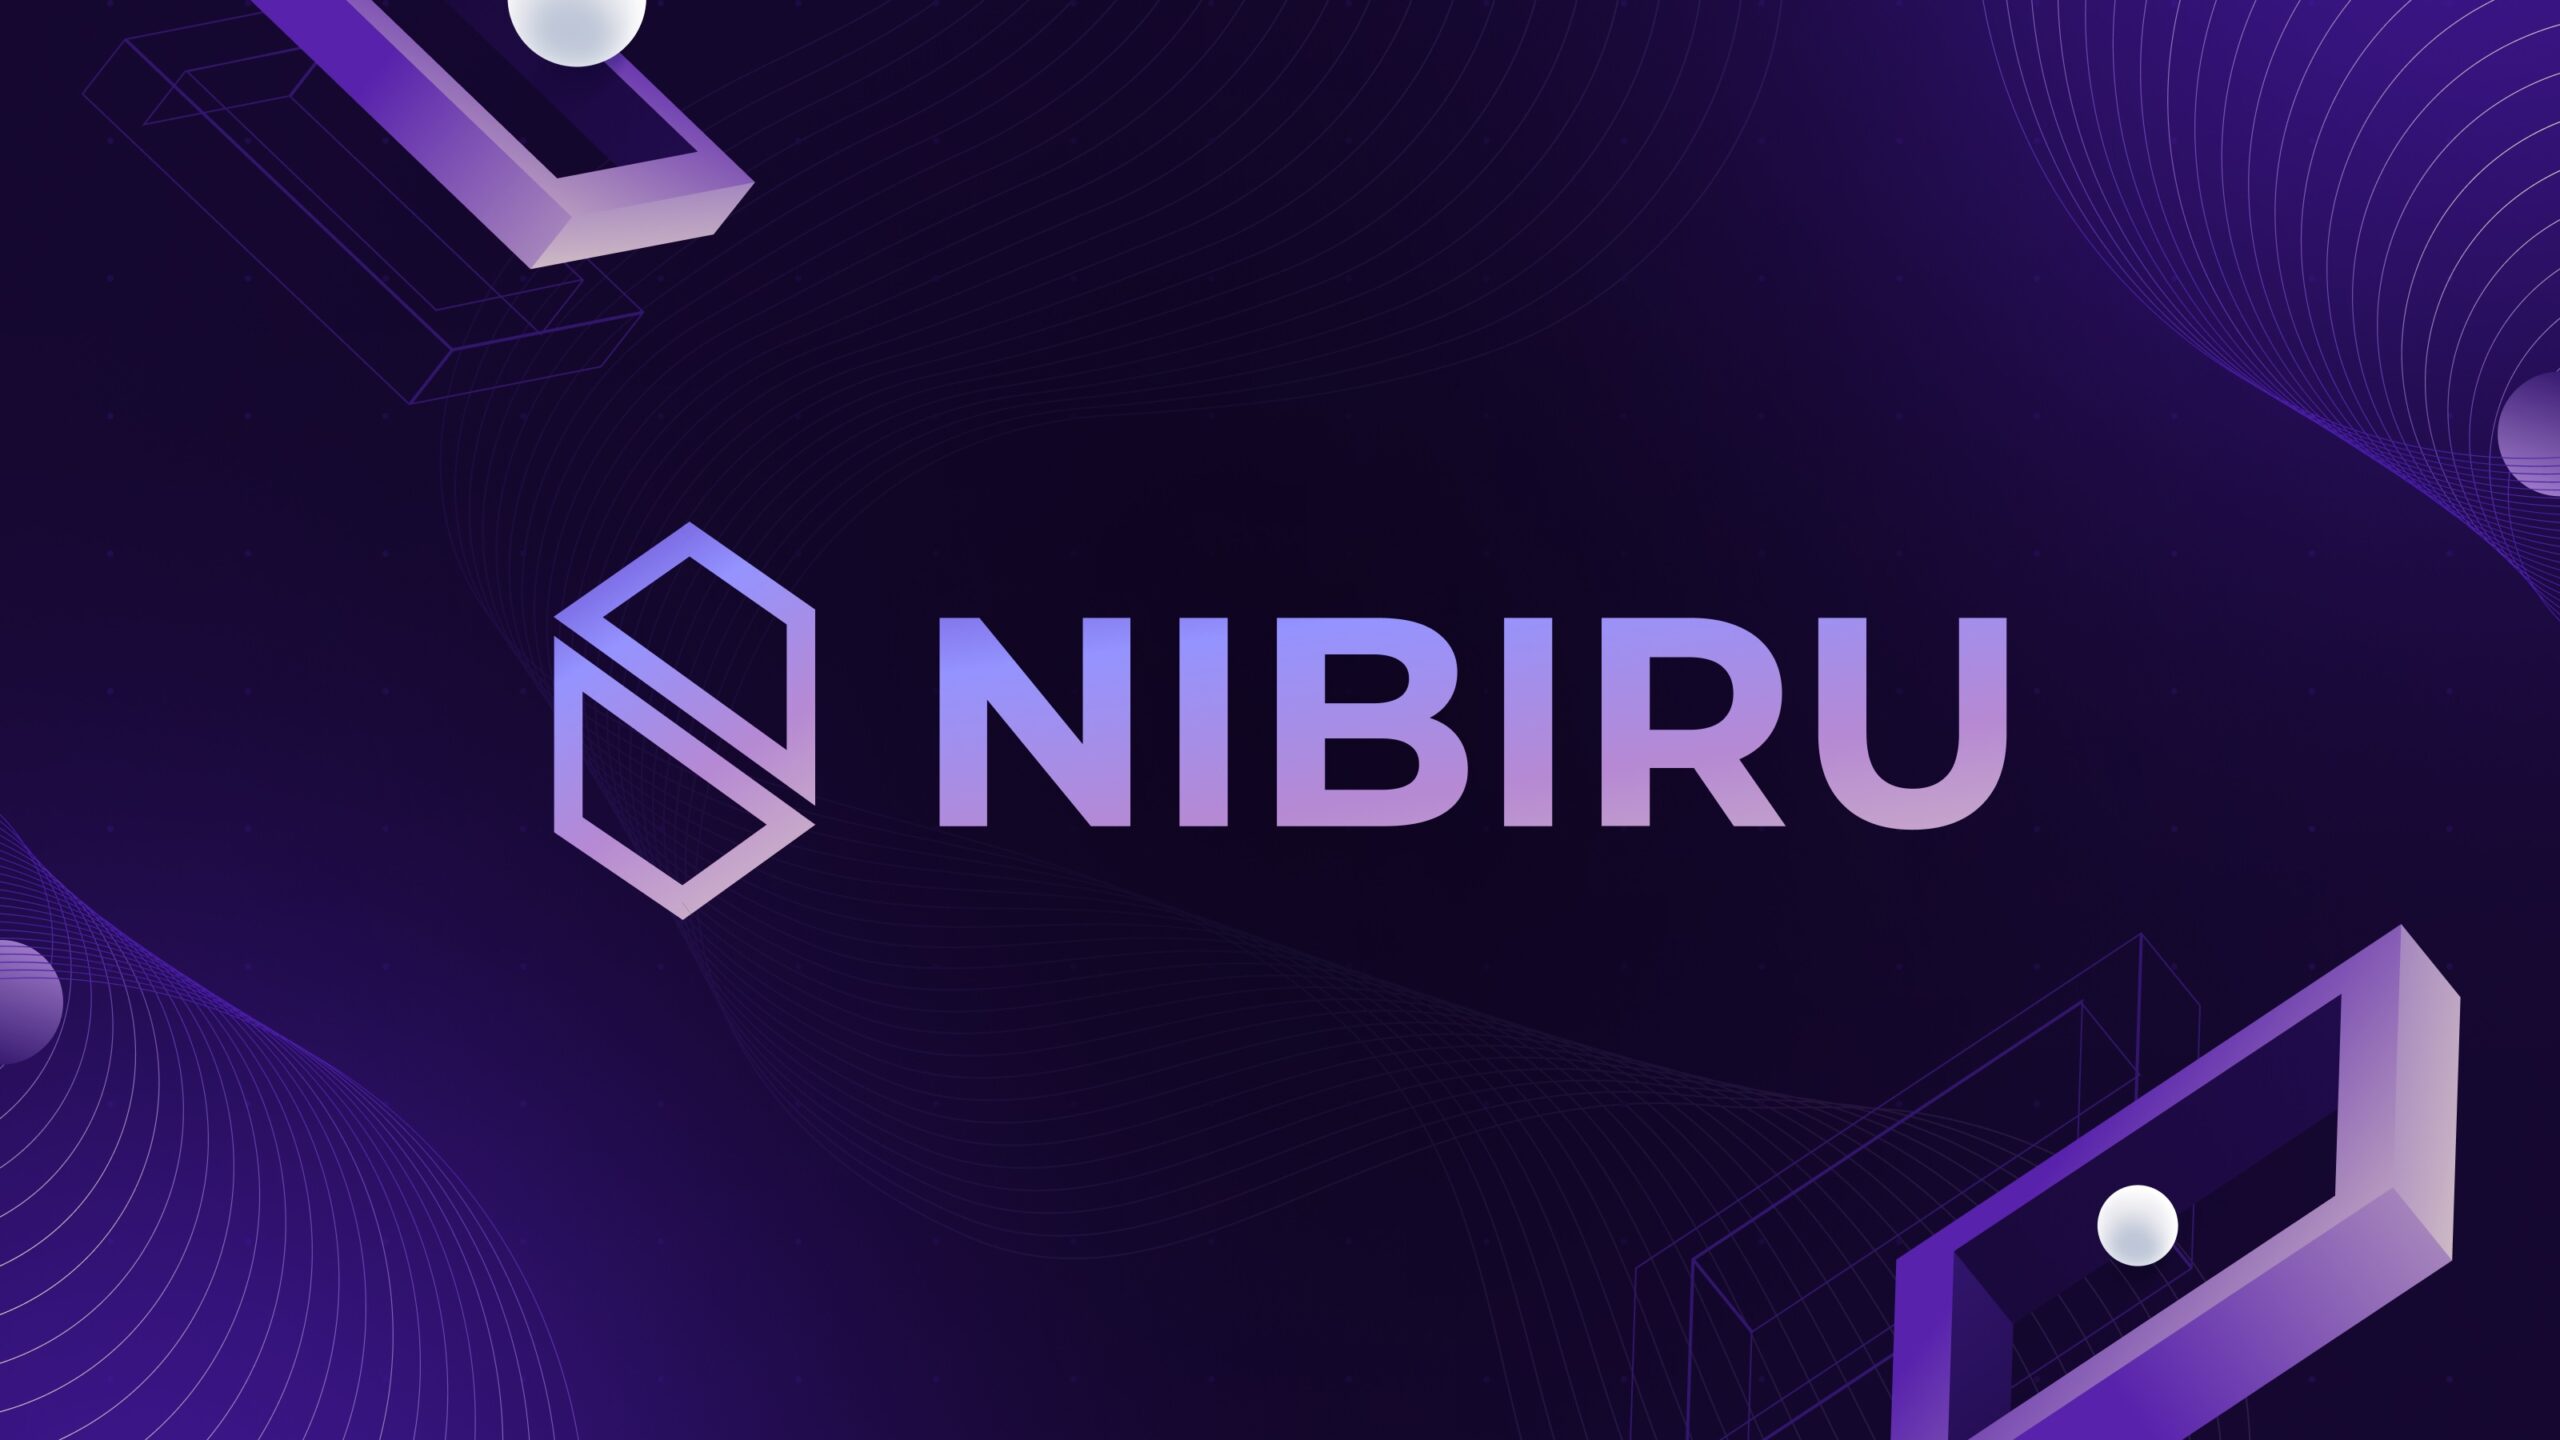 Nibiru Chain Secures $12 Million To Fuel Developer-Focused Layer One Blockchain - The Daily Hodl